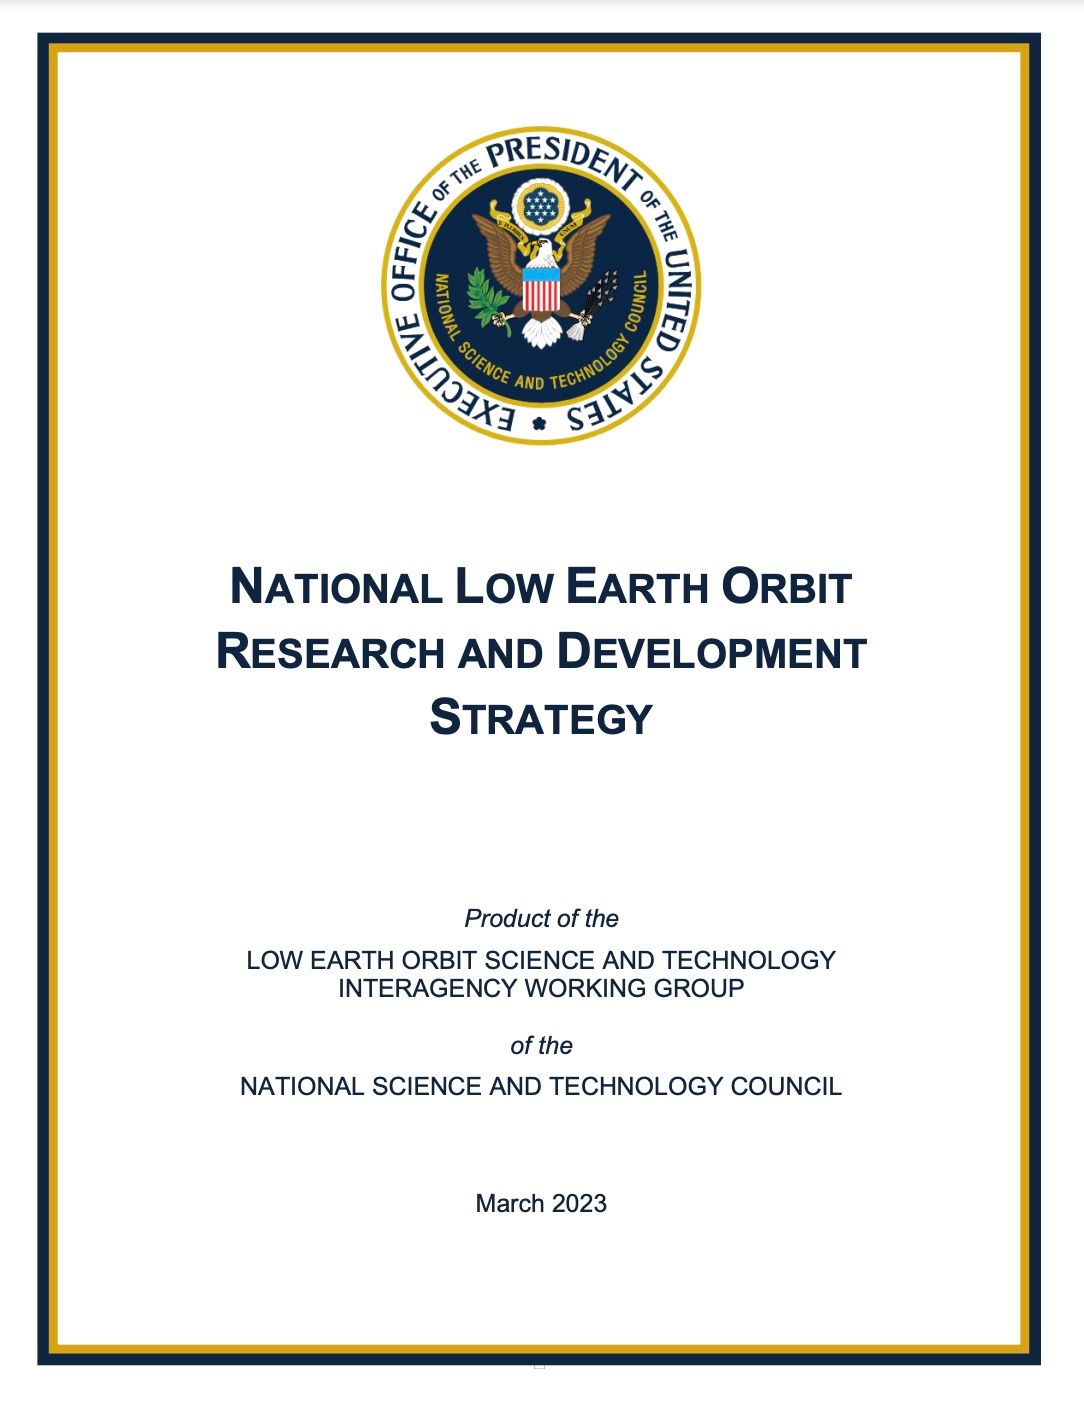 The LEO R&D Strategy, Part 1: National Diplomatic Spacepower